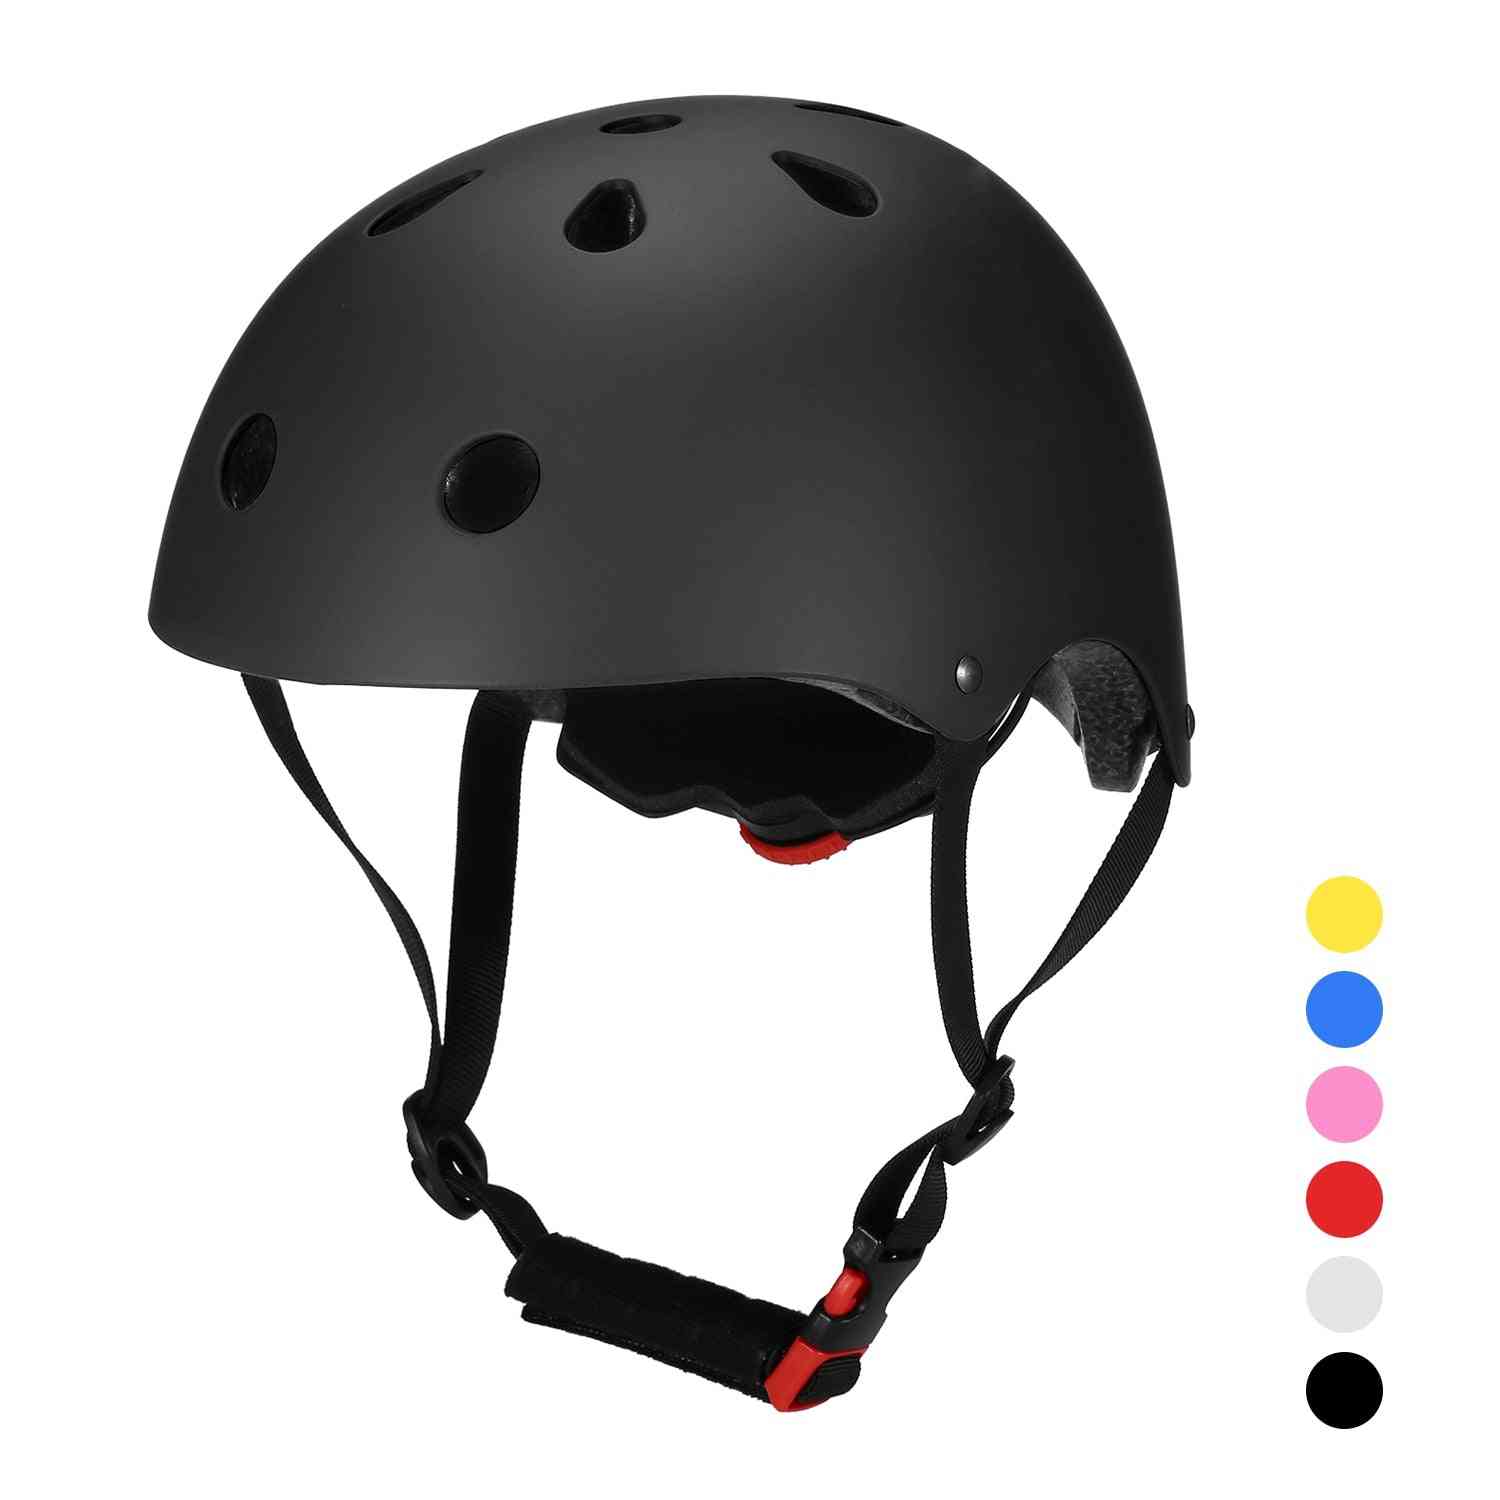 Multi-sports Safety Helmet For Kids/teenagers/adults